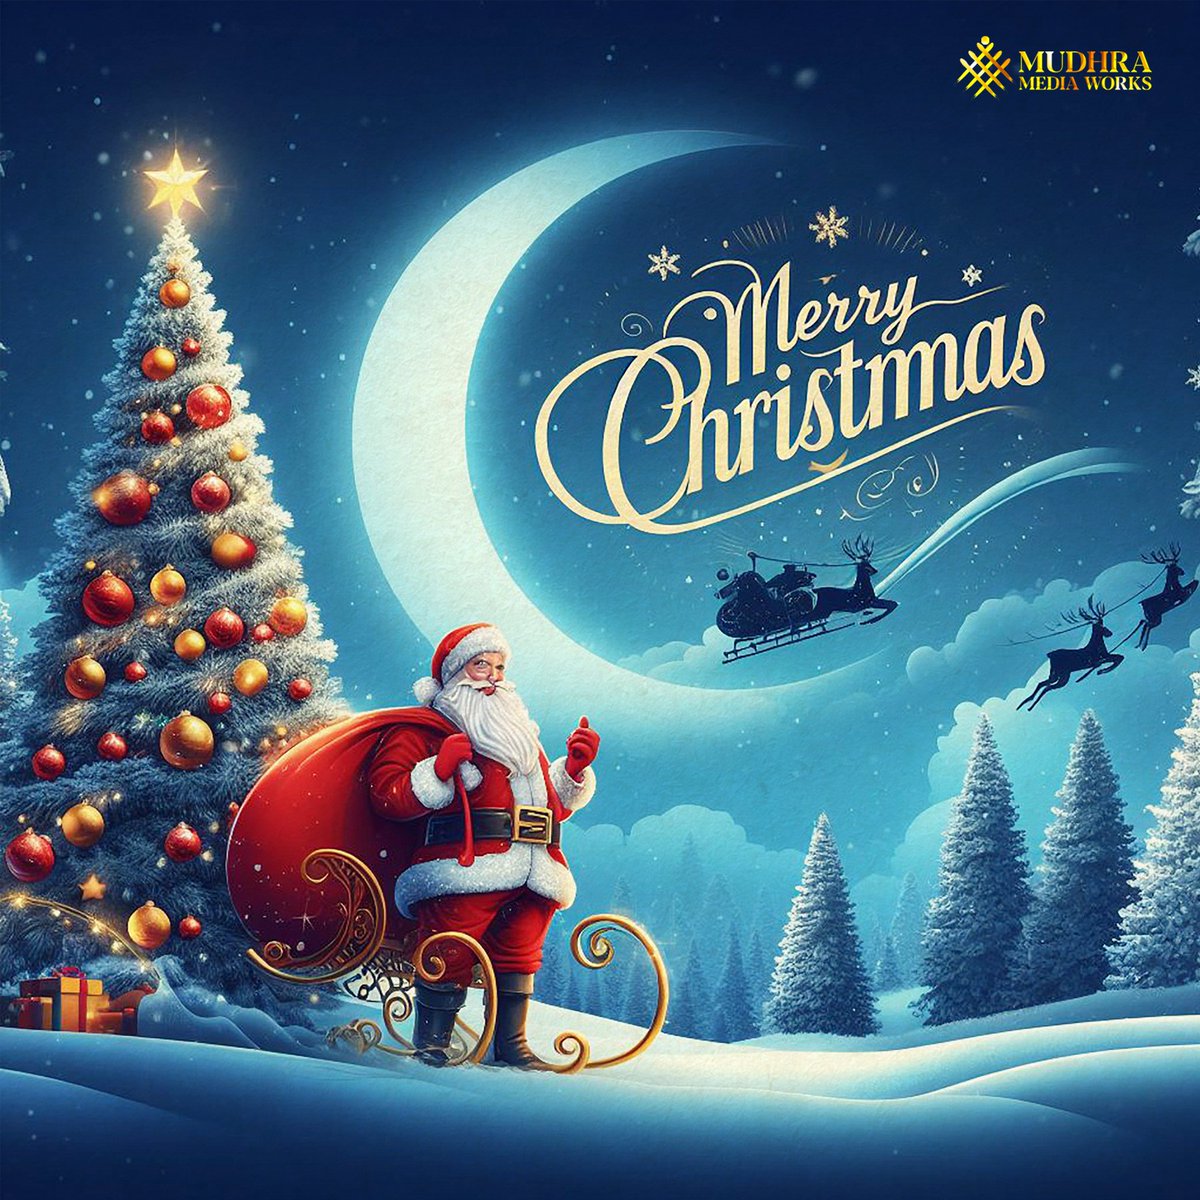 May the Almighty shower his blessings and love upon you and your family everyday. Wishing you a #MerryChristmas 🎄🎅🏻